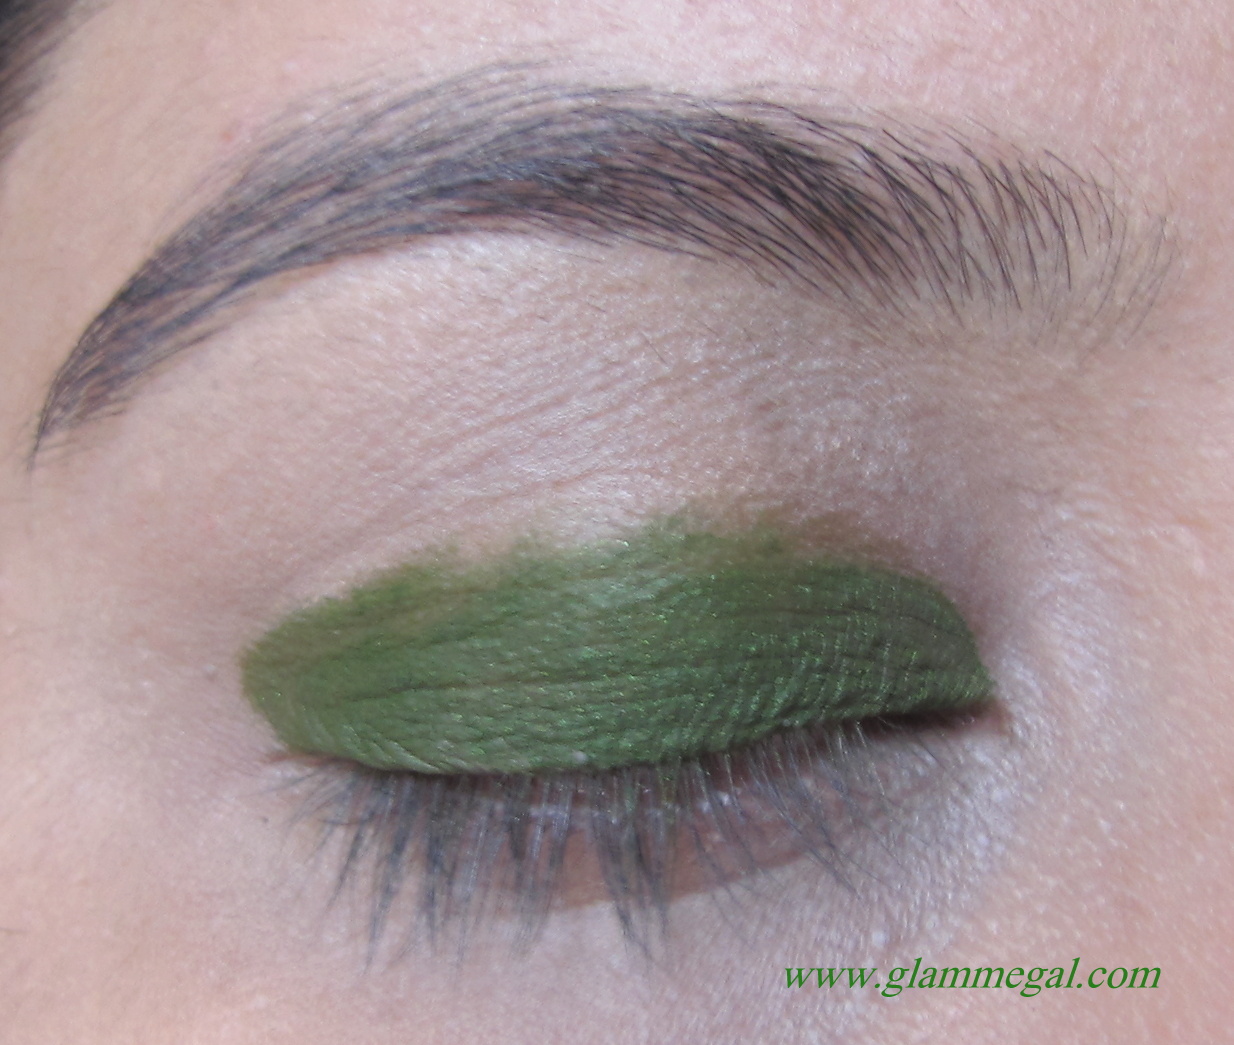 MAKEUP TUTORIAL GO GREEN ON THE EYES GLAMMEGAL